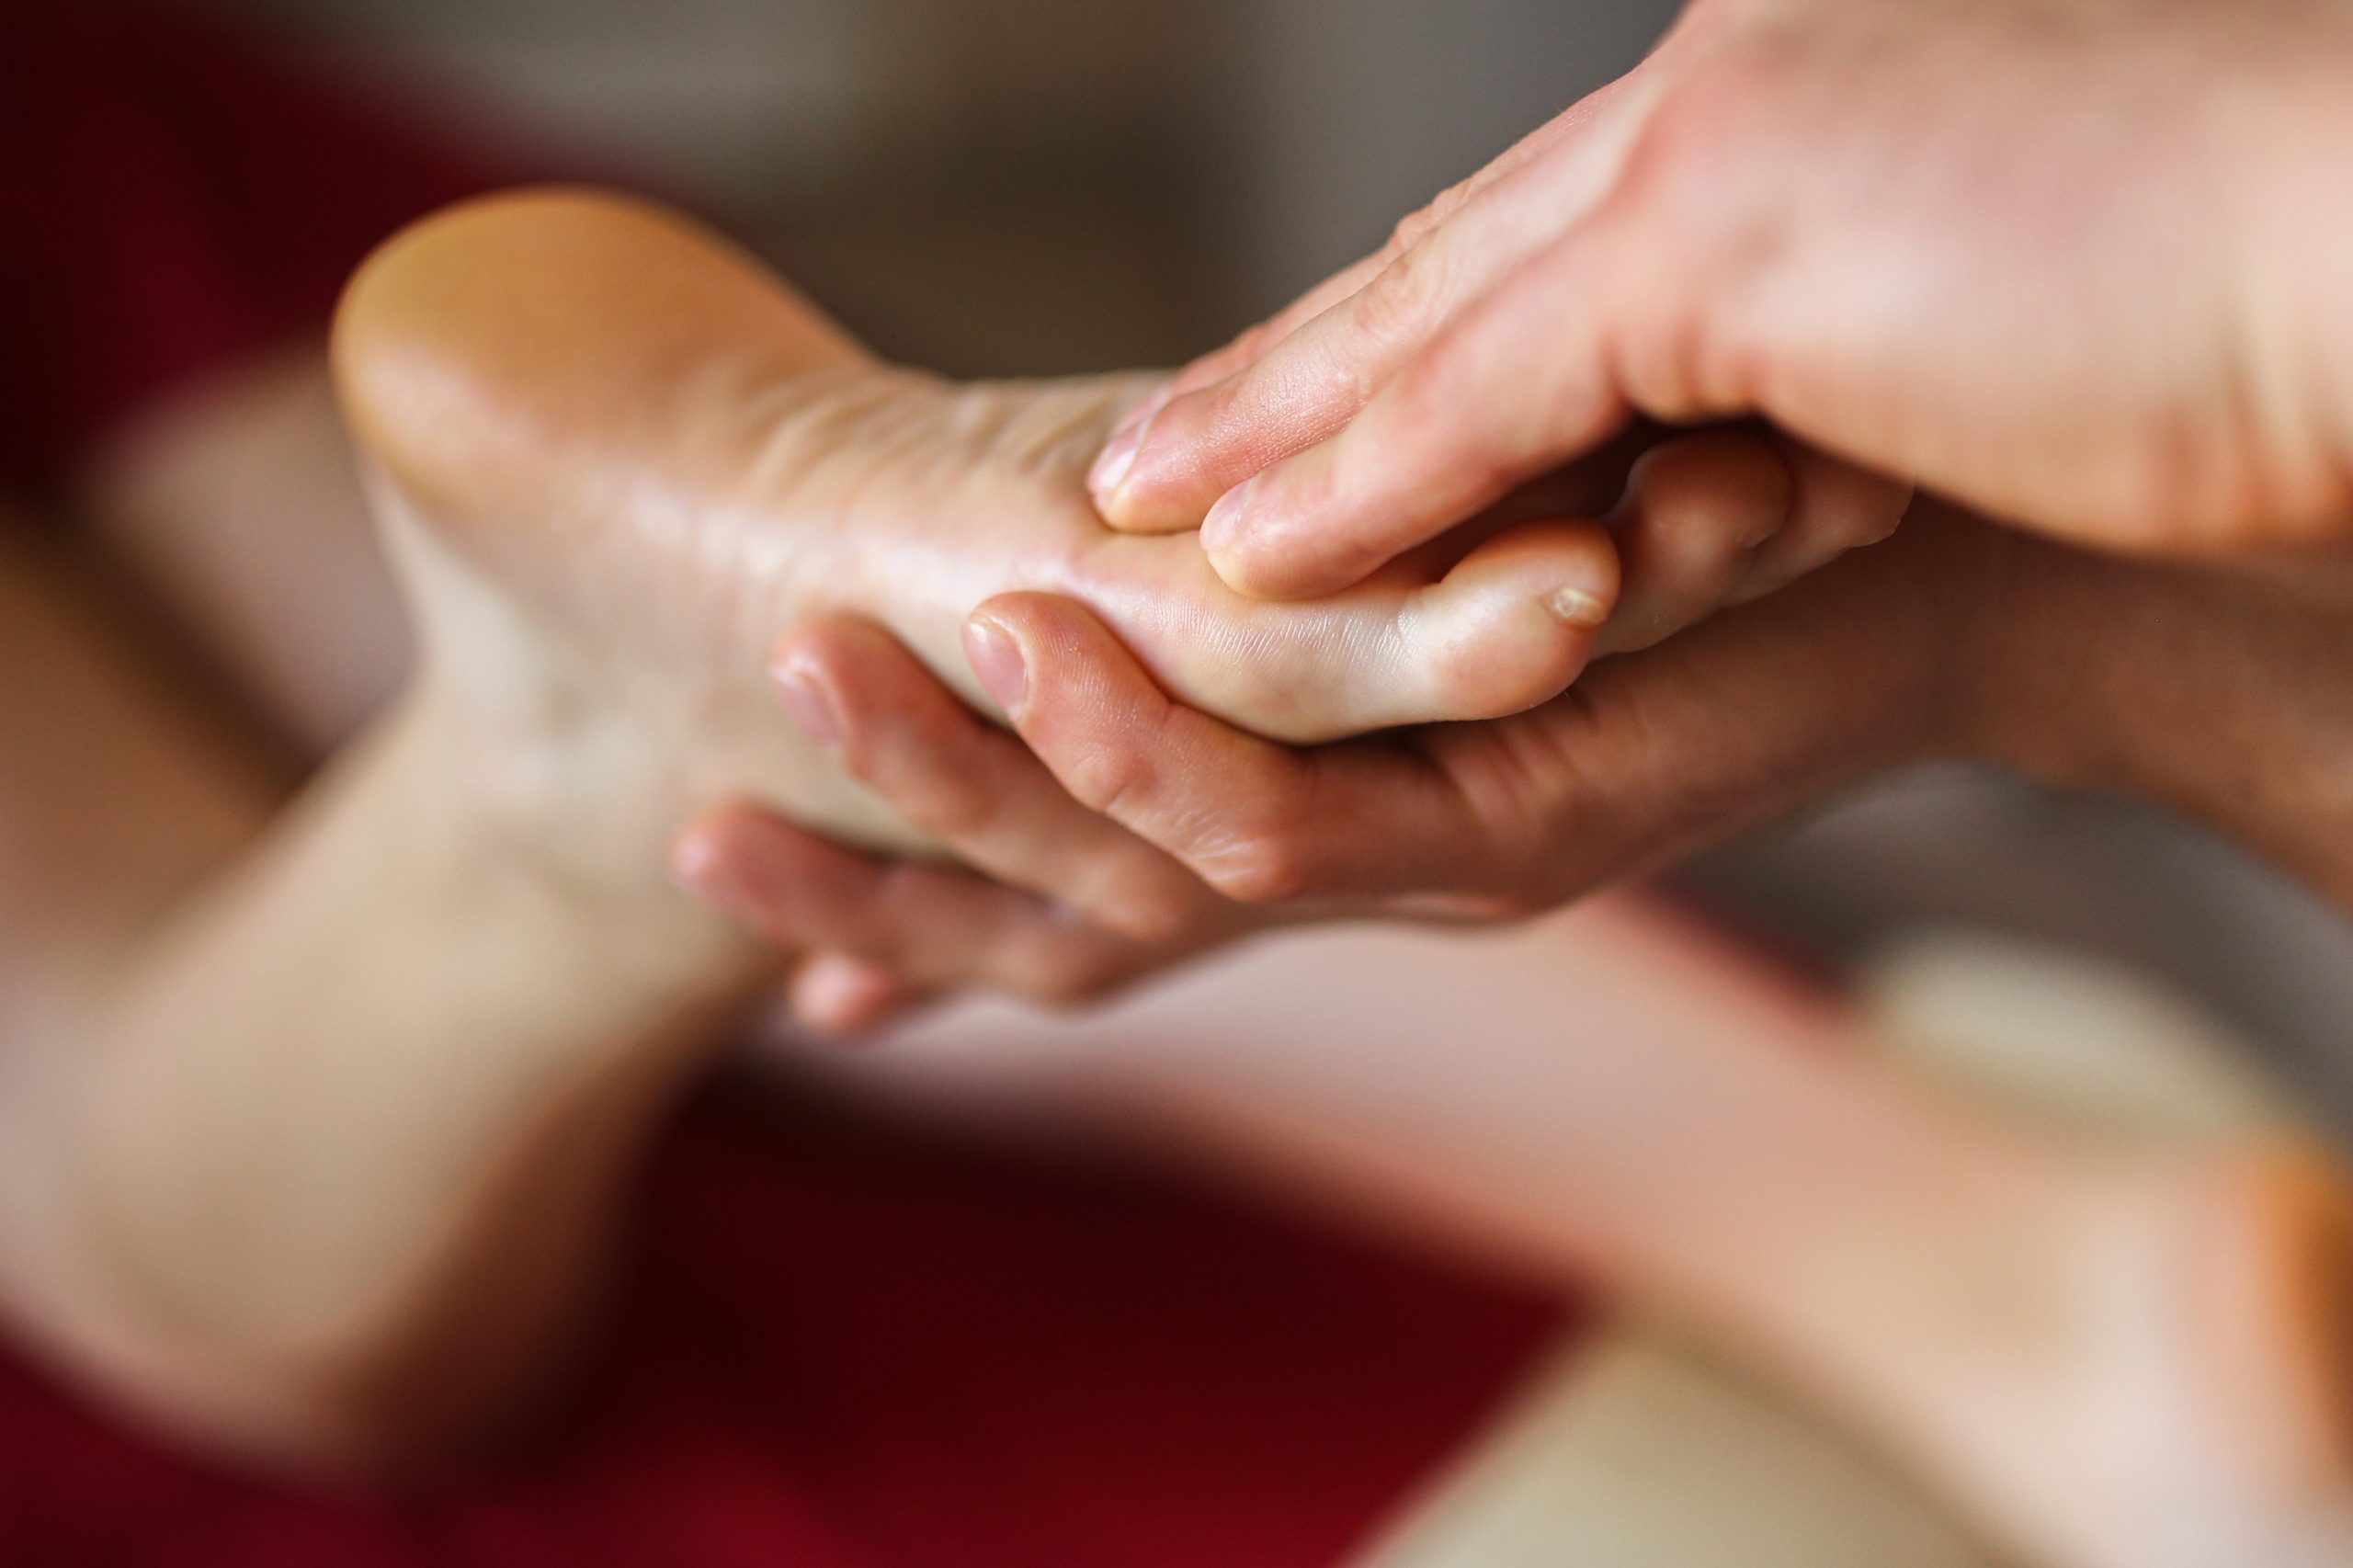 Foot massage to prevent, heal, relieve or avoid?